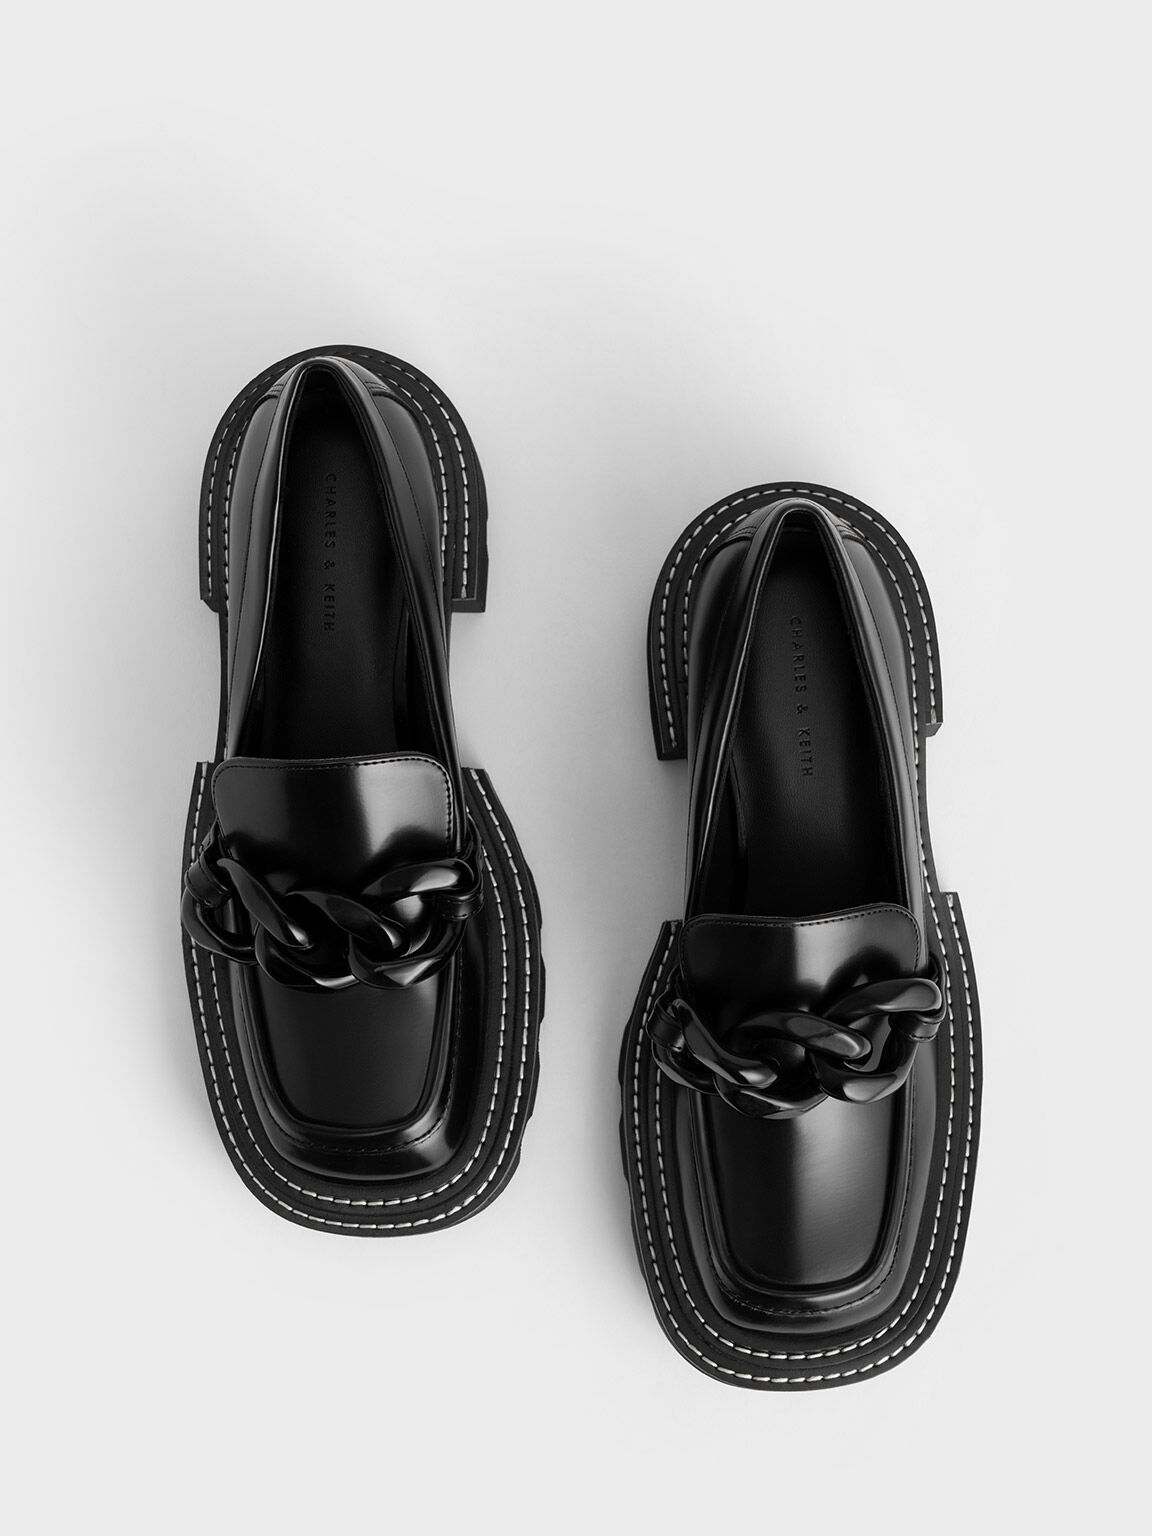 Perline Chunky Chain Loafers, Black, hi-res